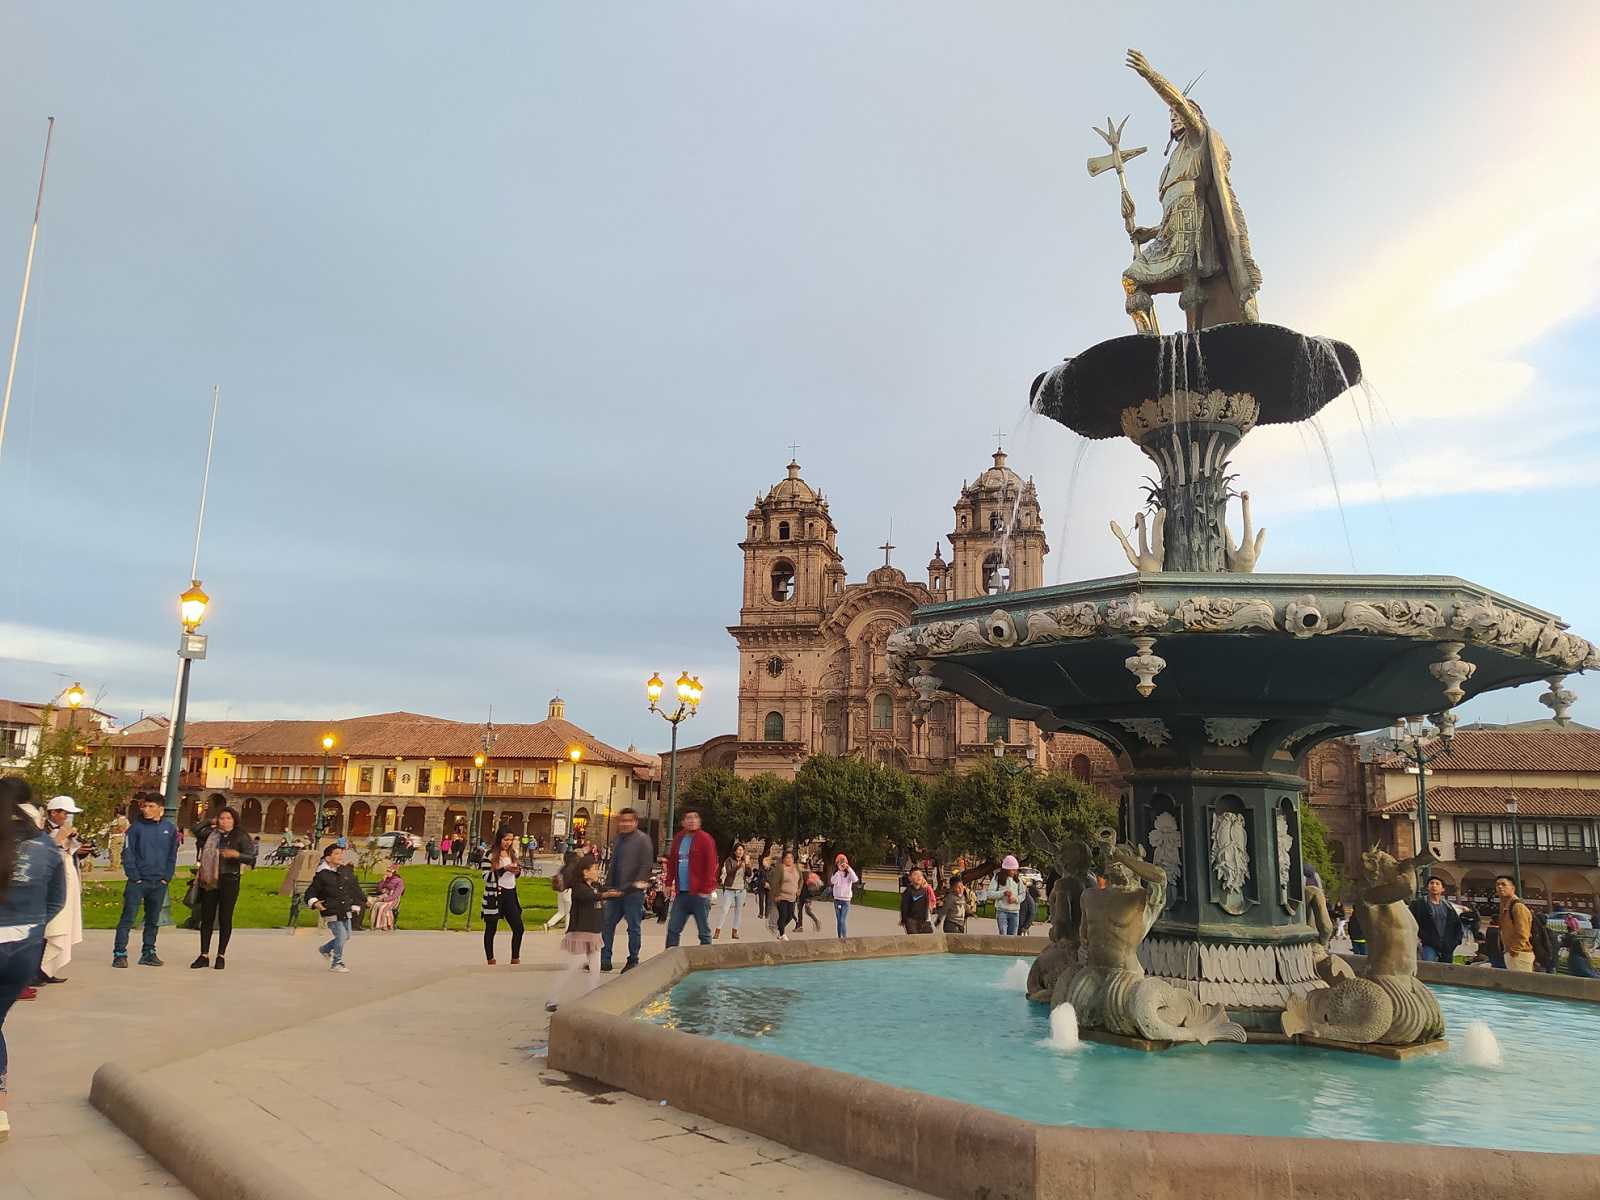 Panoramic view of the impressive colonial and Inca architecture in the Plaza de Armas in Cusco, Peru